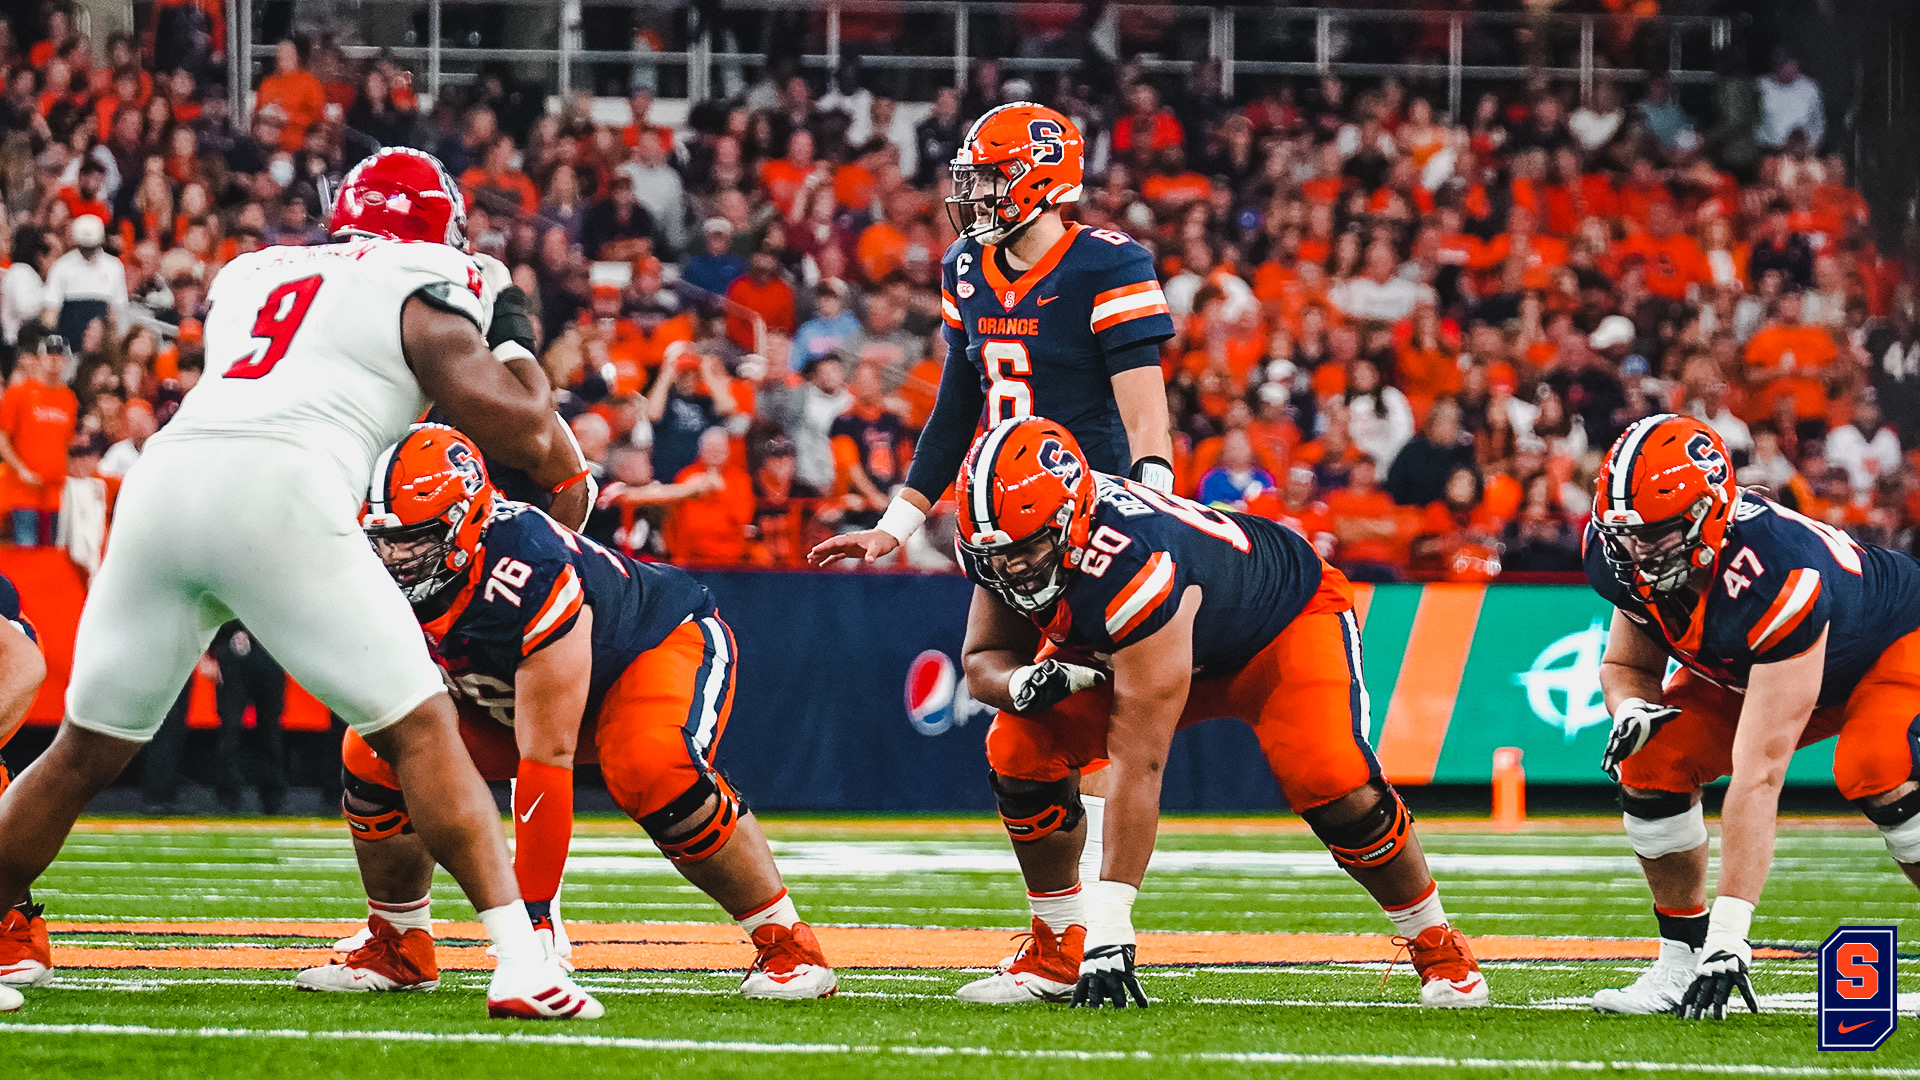 Syracuse improves to 6-0 with win over NC State (full coverage)